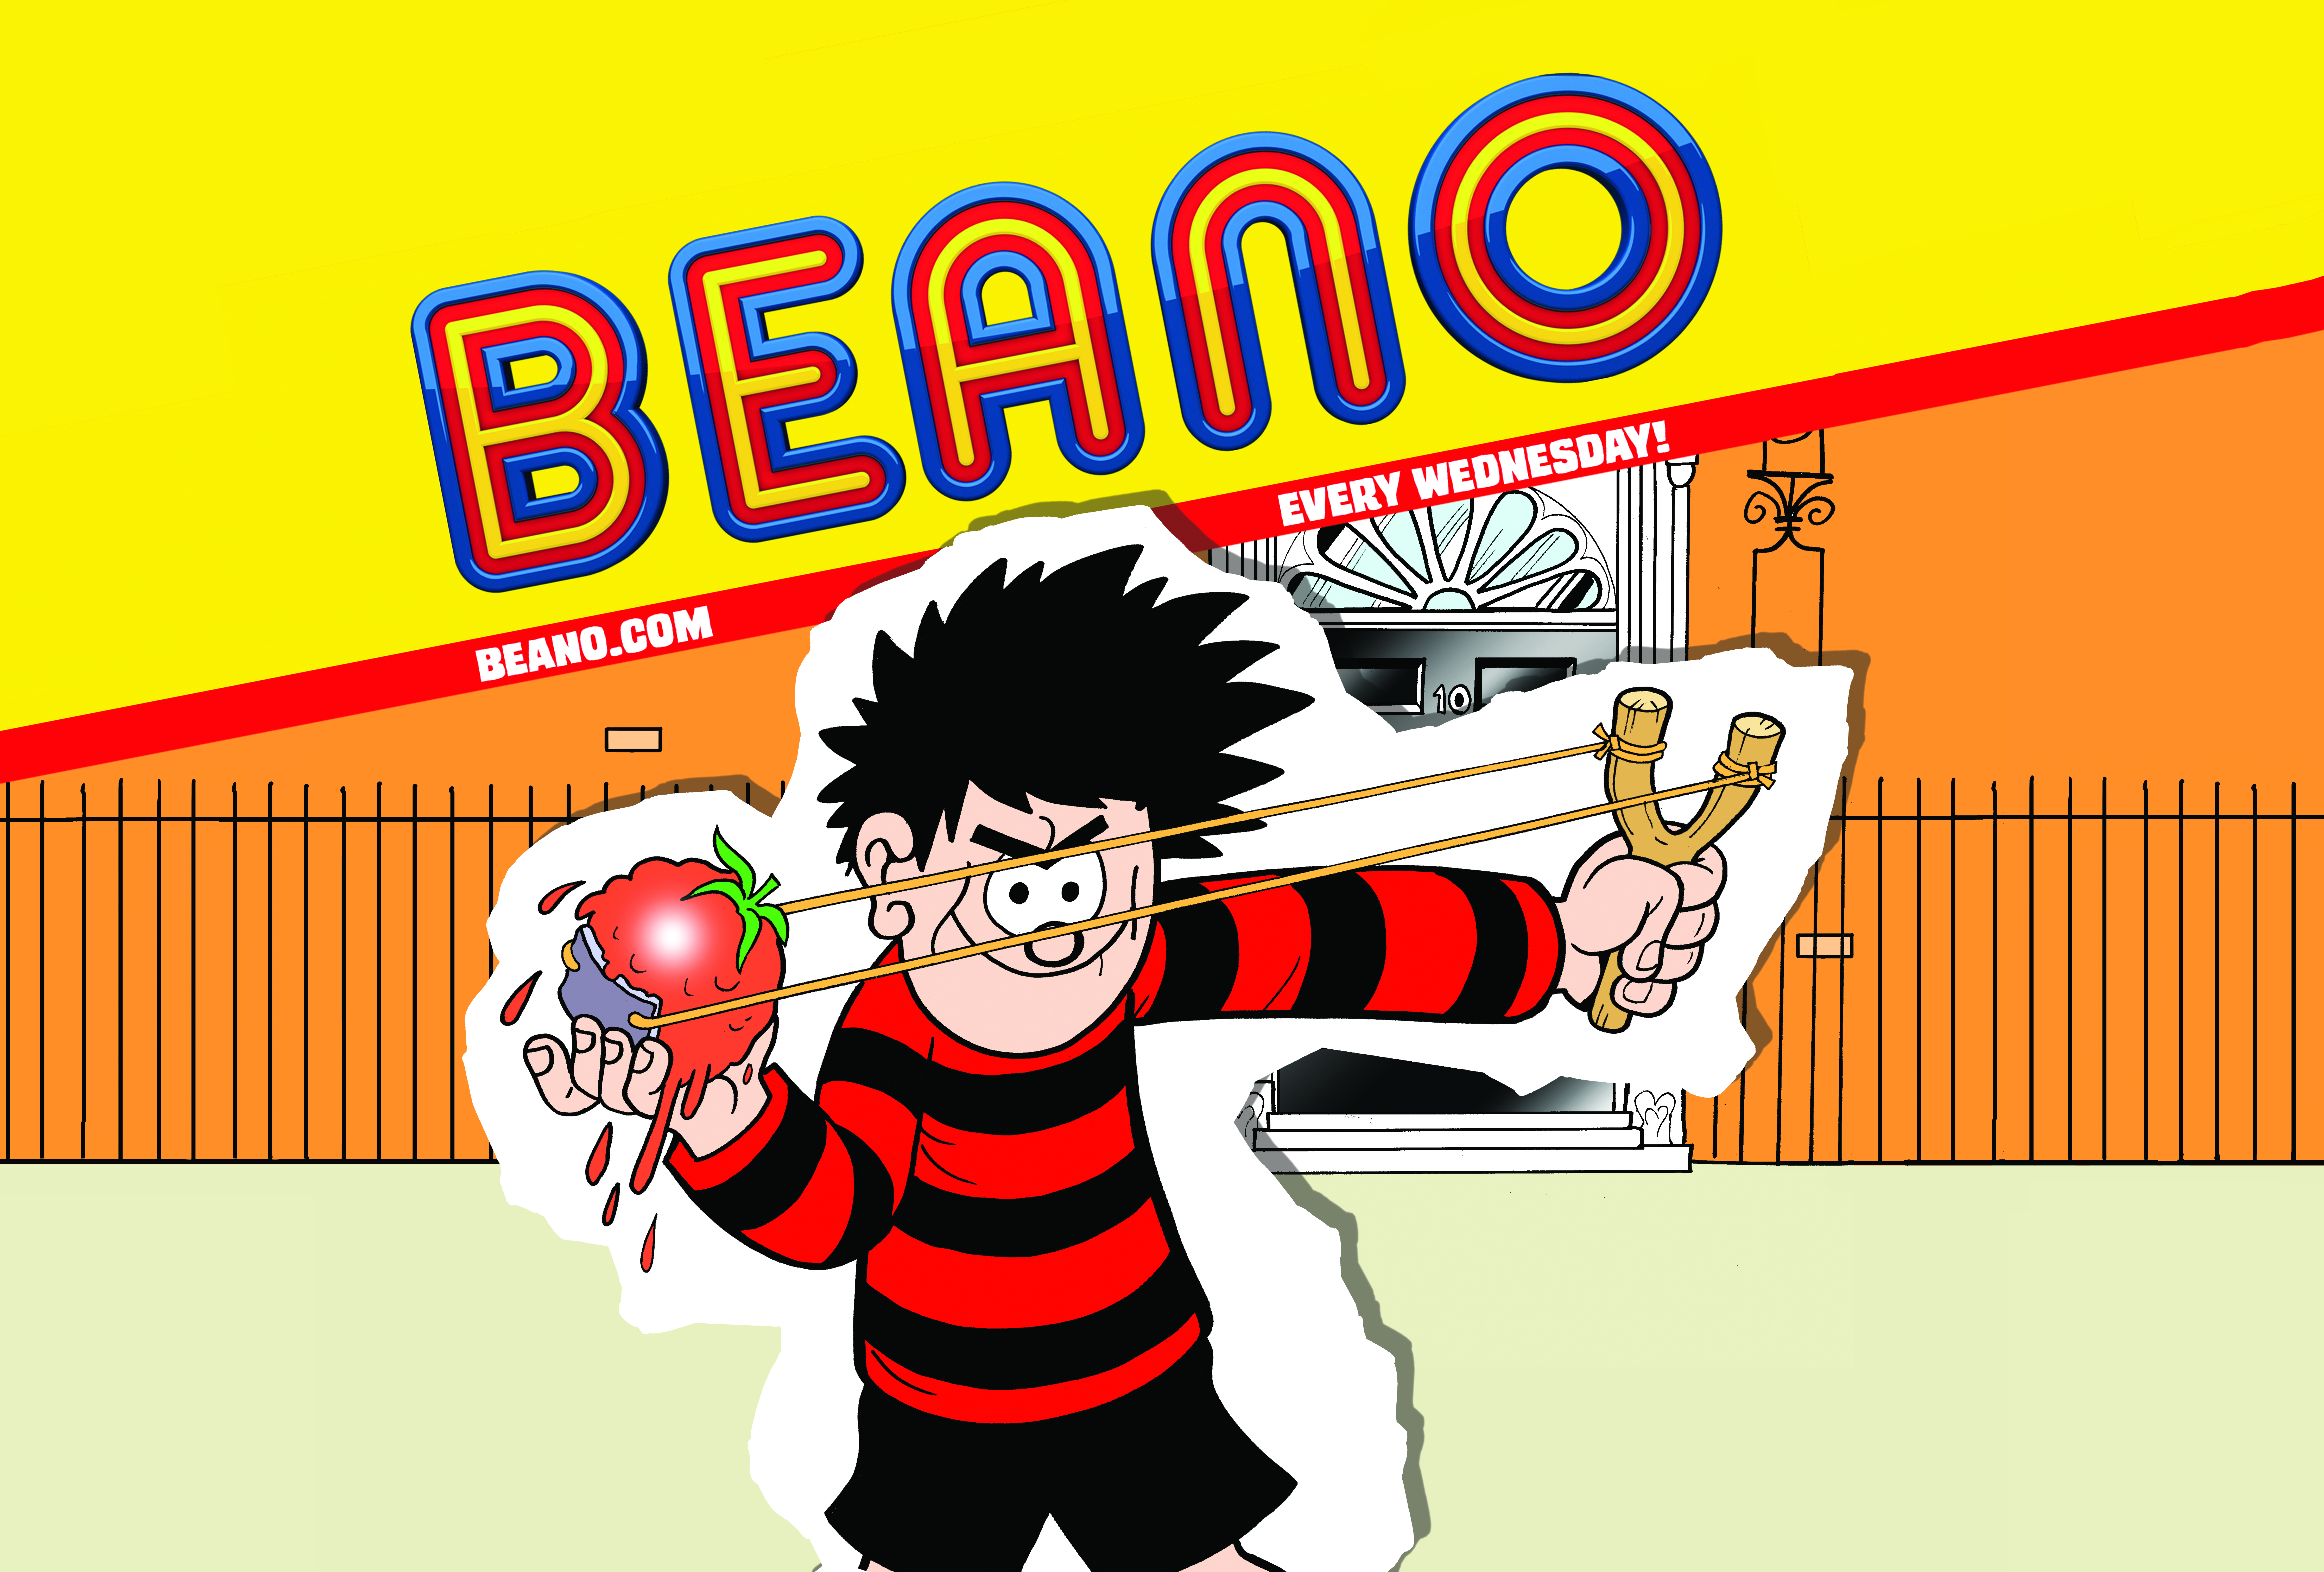 Dennis the Menace is ready for the election!